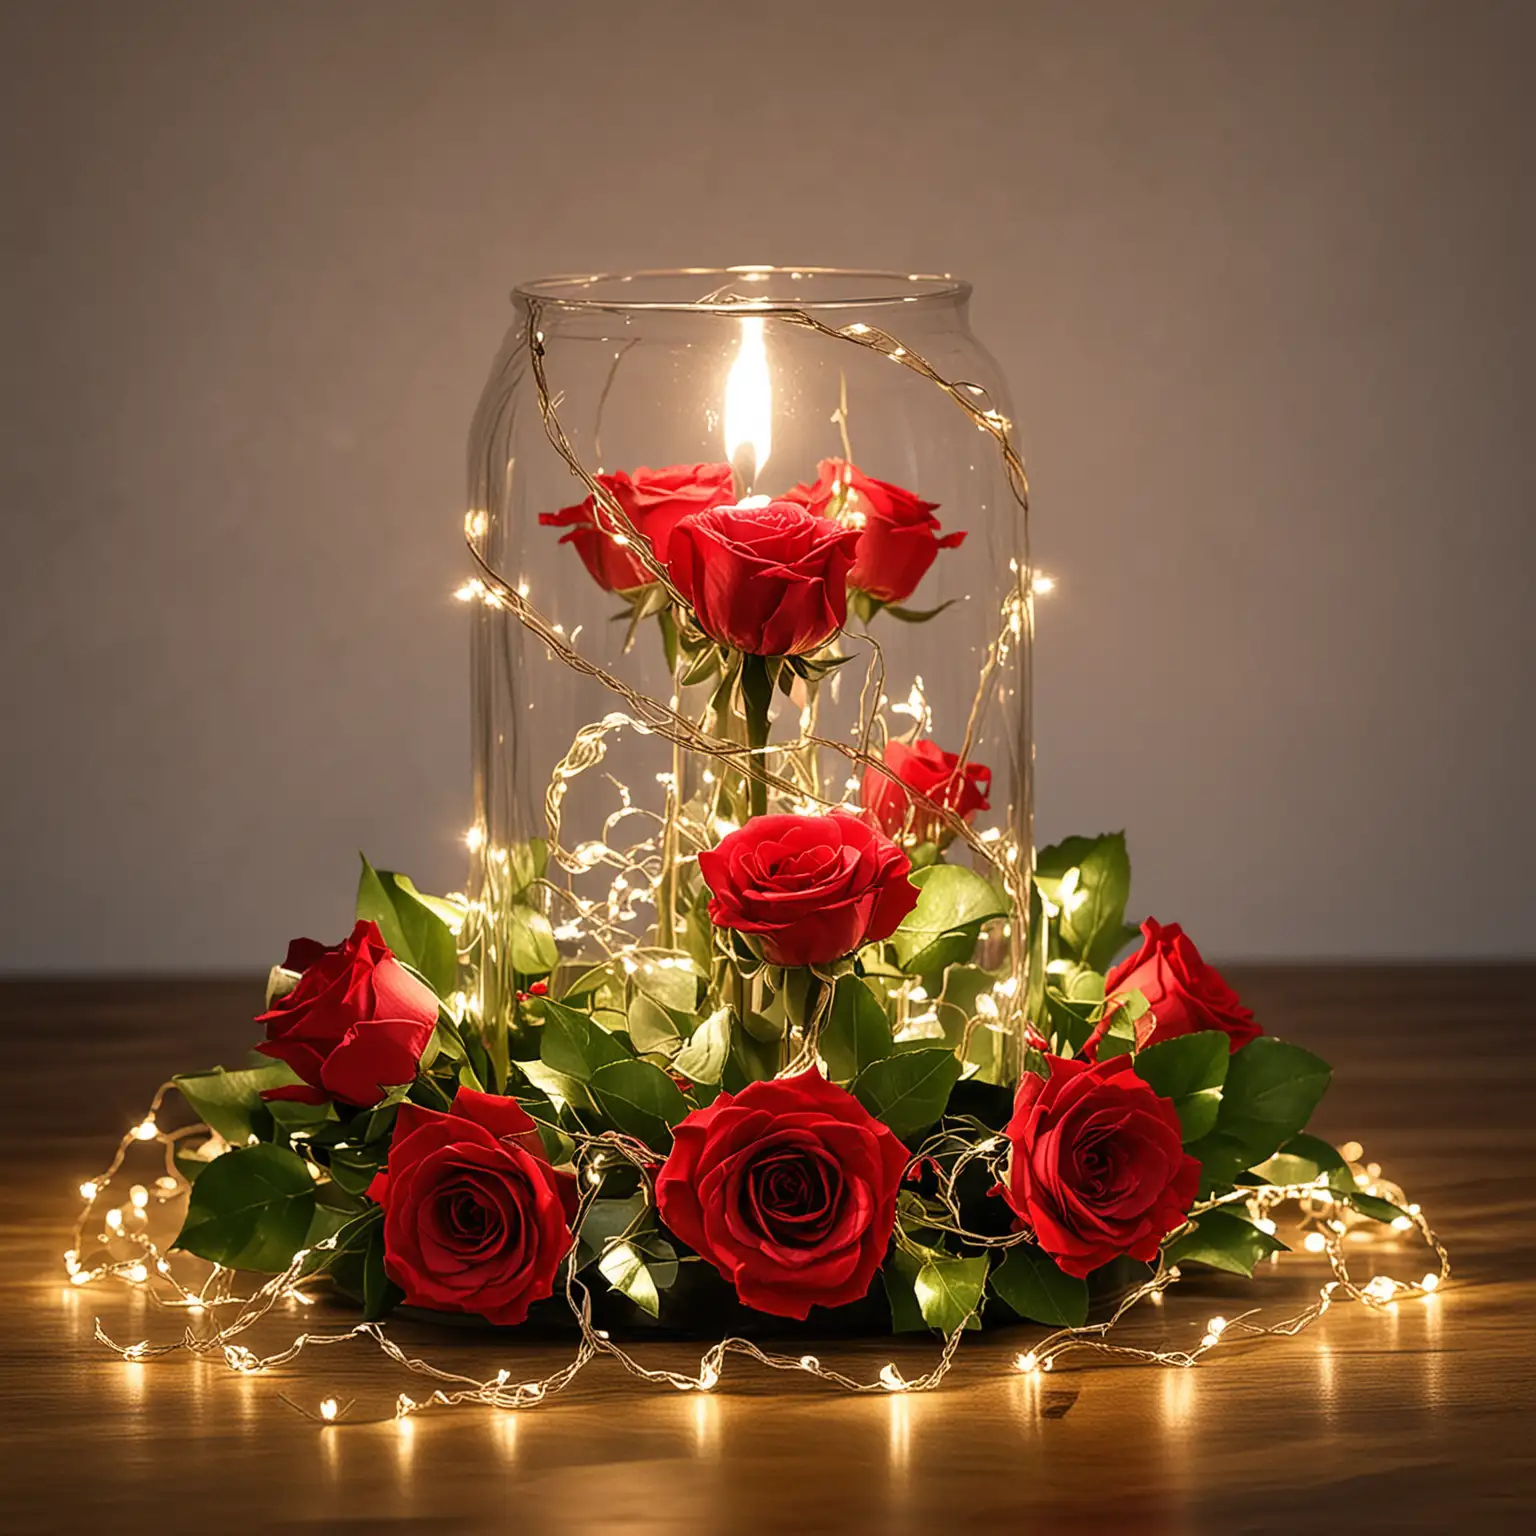 DIY-Elegant-Centerpiece-Red-Roses-and-Fairy-Lights